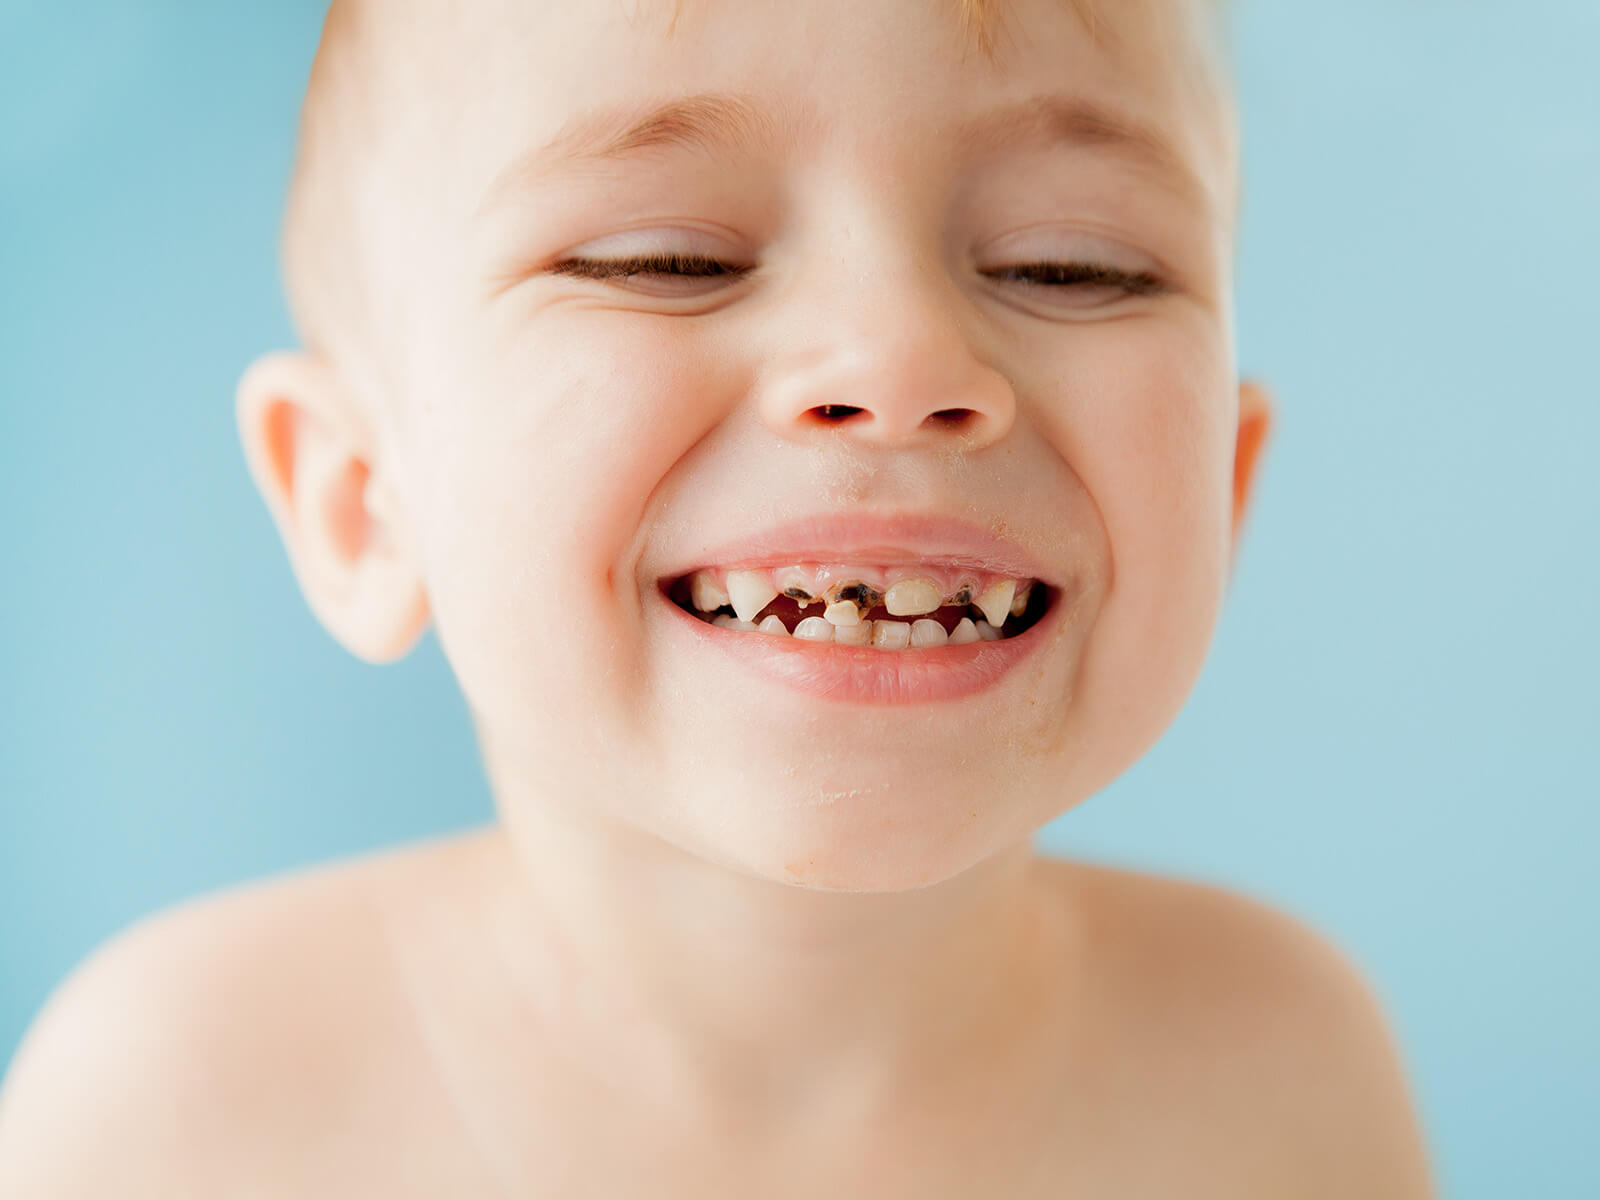 What To Do If Your Child Chips, Cracks, Or Knocks Out A Tooth